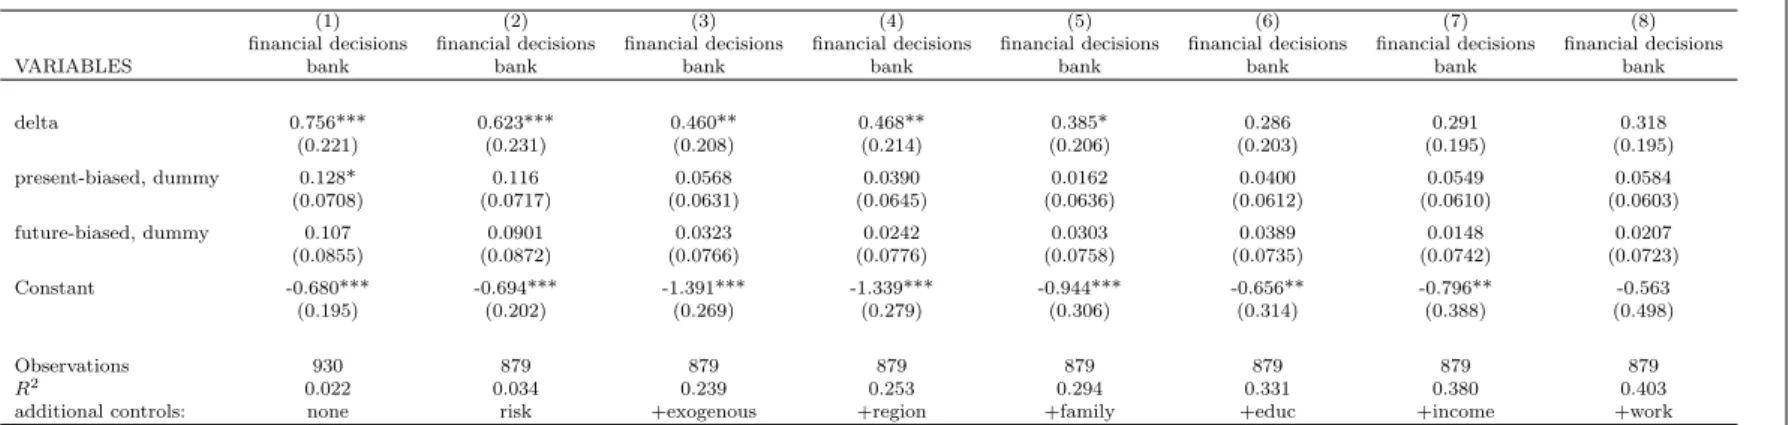 Table 7: The association of time preference with banking decisions, OLS